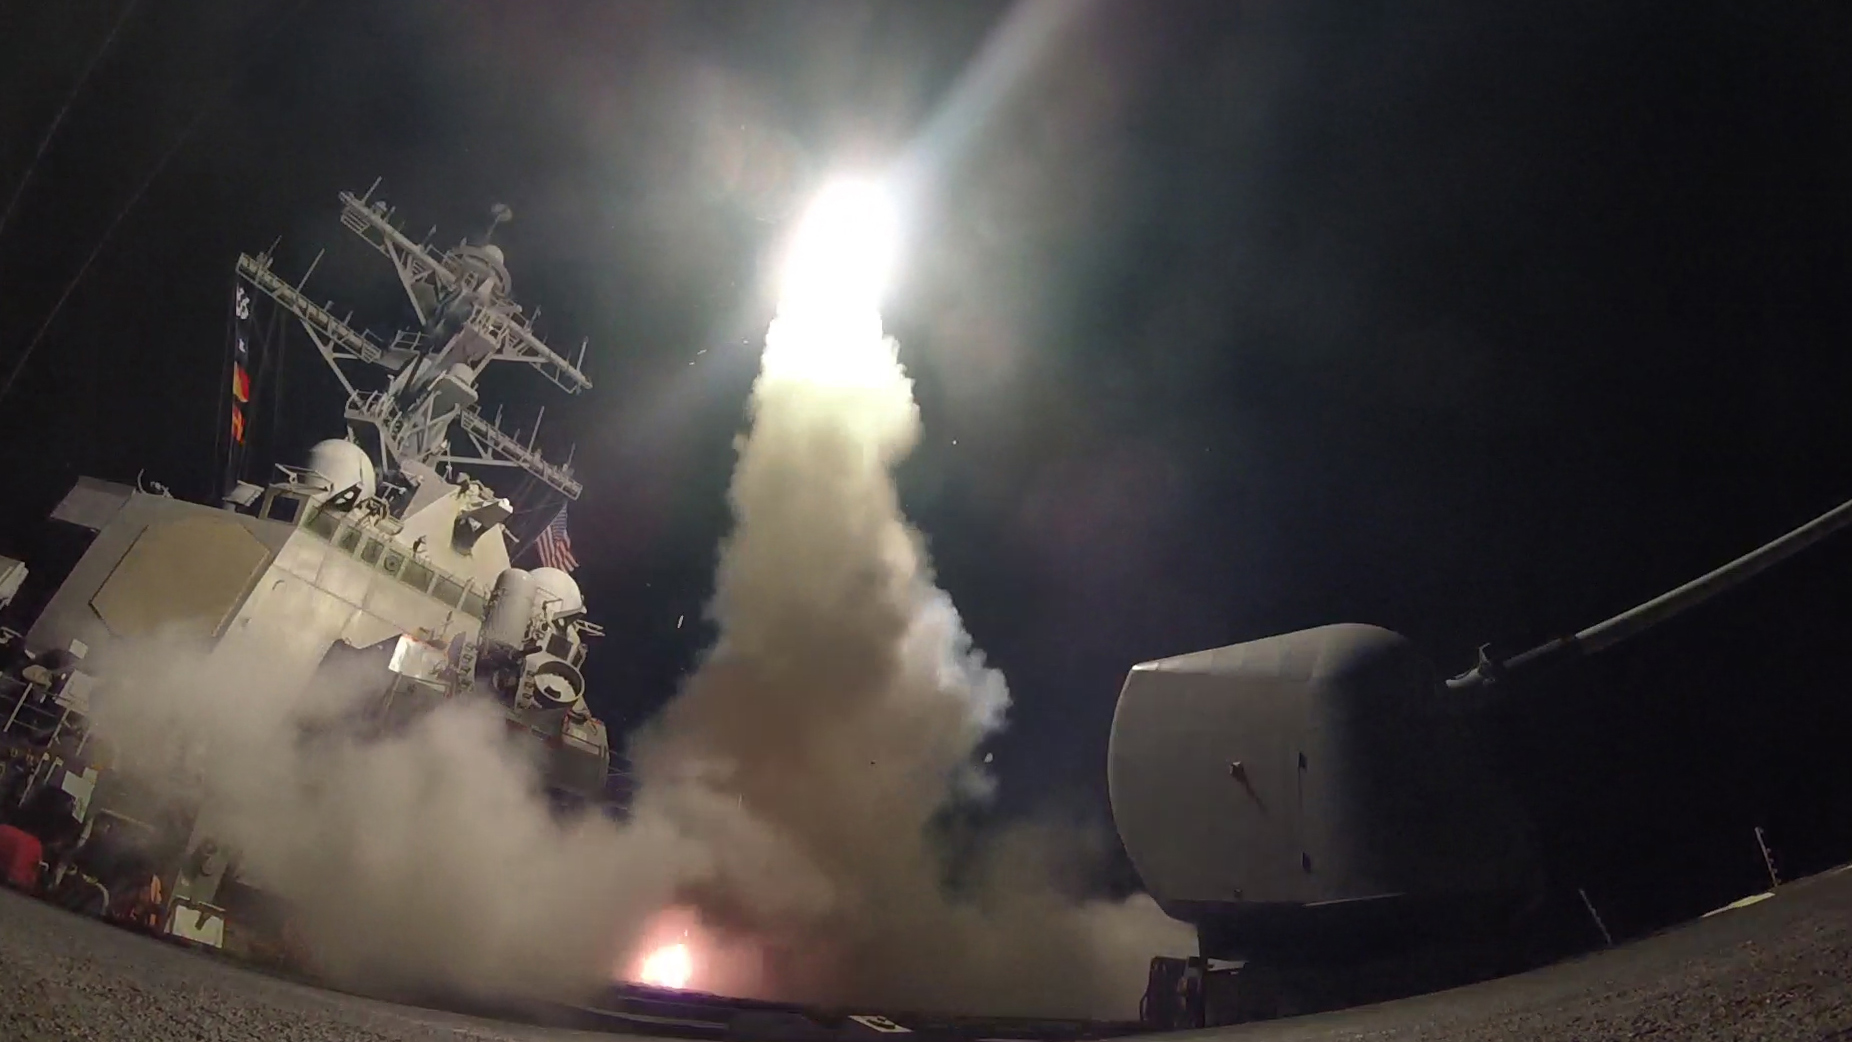 MEDITERRANEAN SEA - APRIL 7: In this handout provided by the U.S. Navy,The guided-missile destroyer USS Porter fires a Tomahawk land attack missile on April 7, 2017 in the Mediterranean Sea. The USS Porter was one of two destroyers that fired a total of 59 cruise missiles at a Syrian military airfield in retaliation for a chemical attack that killed scores of civilians this week. The attack was the first direct U.S. assault on Syria and the government of President Bashar al-Assad in the six-year war there. 